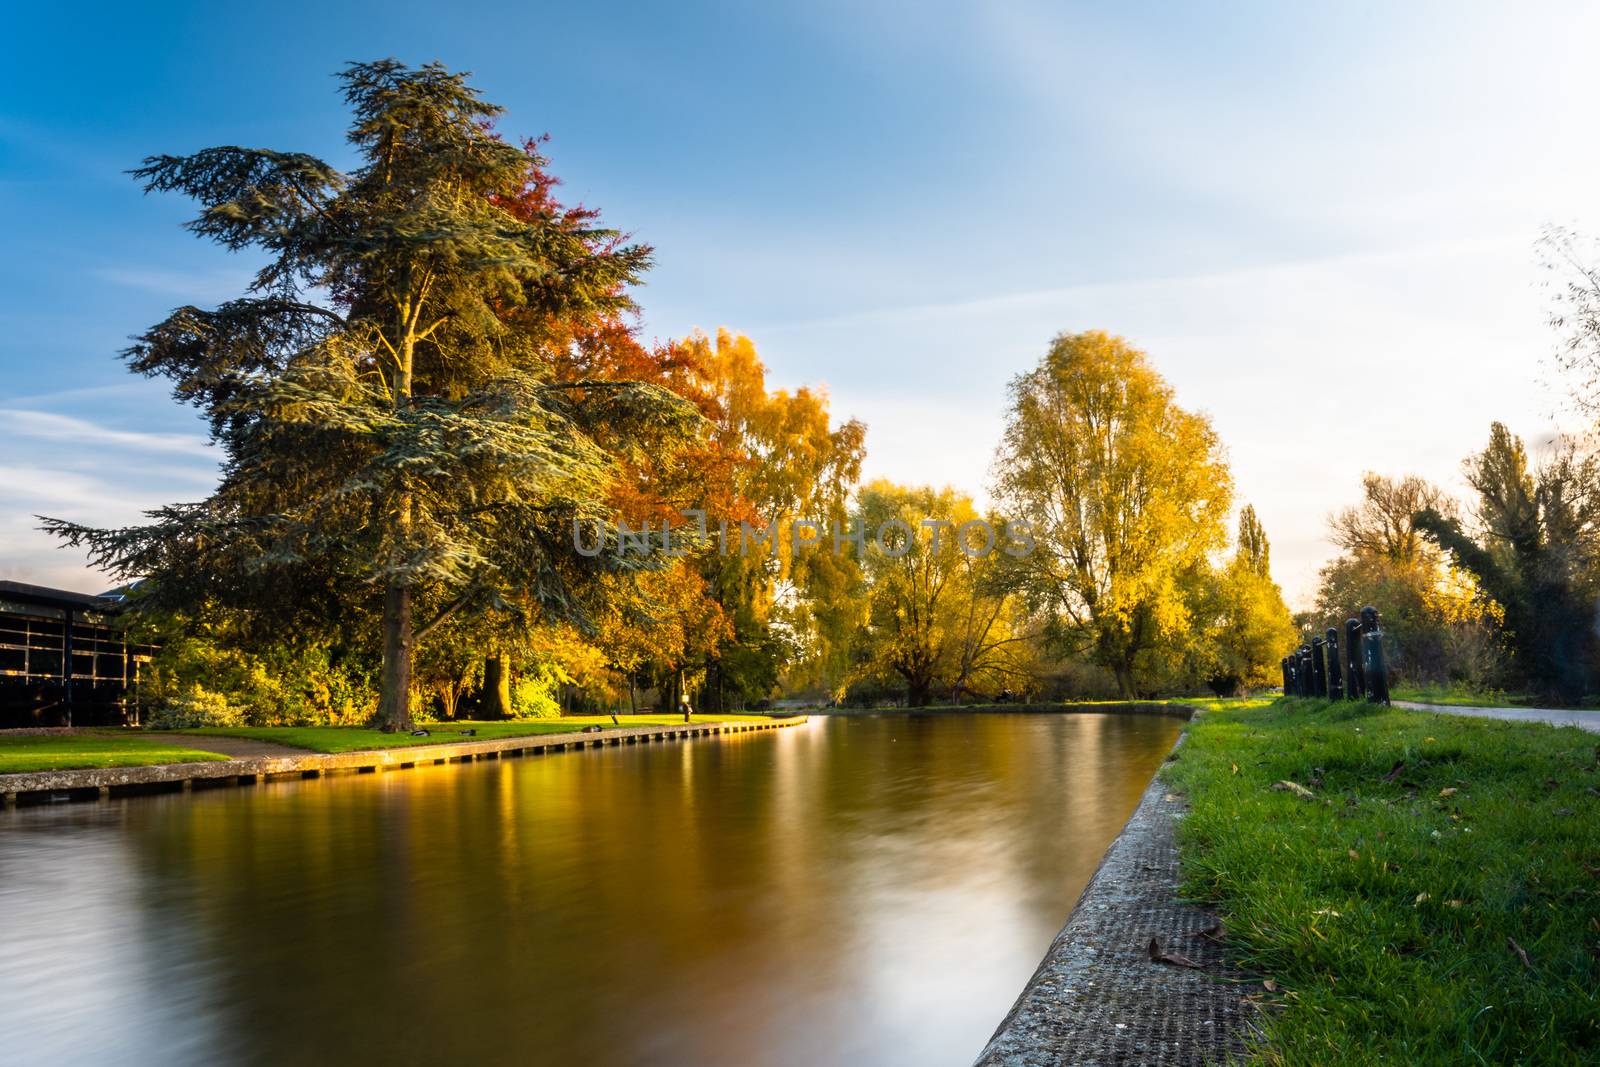 Lon exposure image of the river Cam in warm afternoon light in autumn, Cambridge